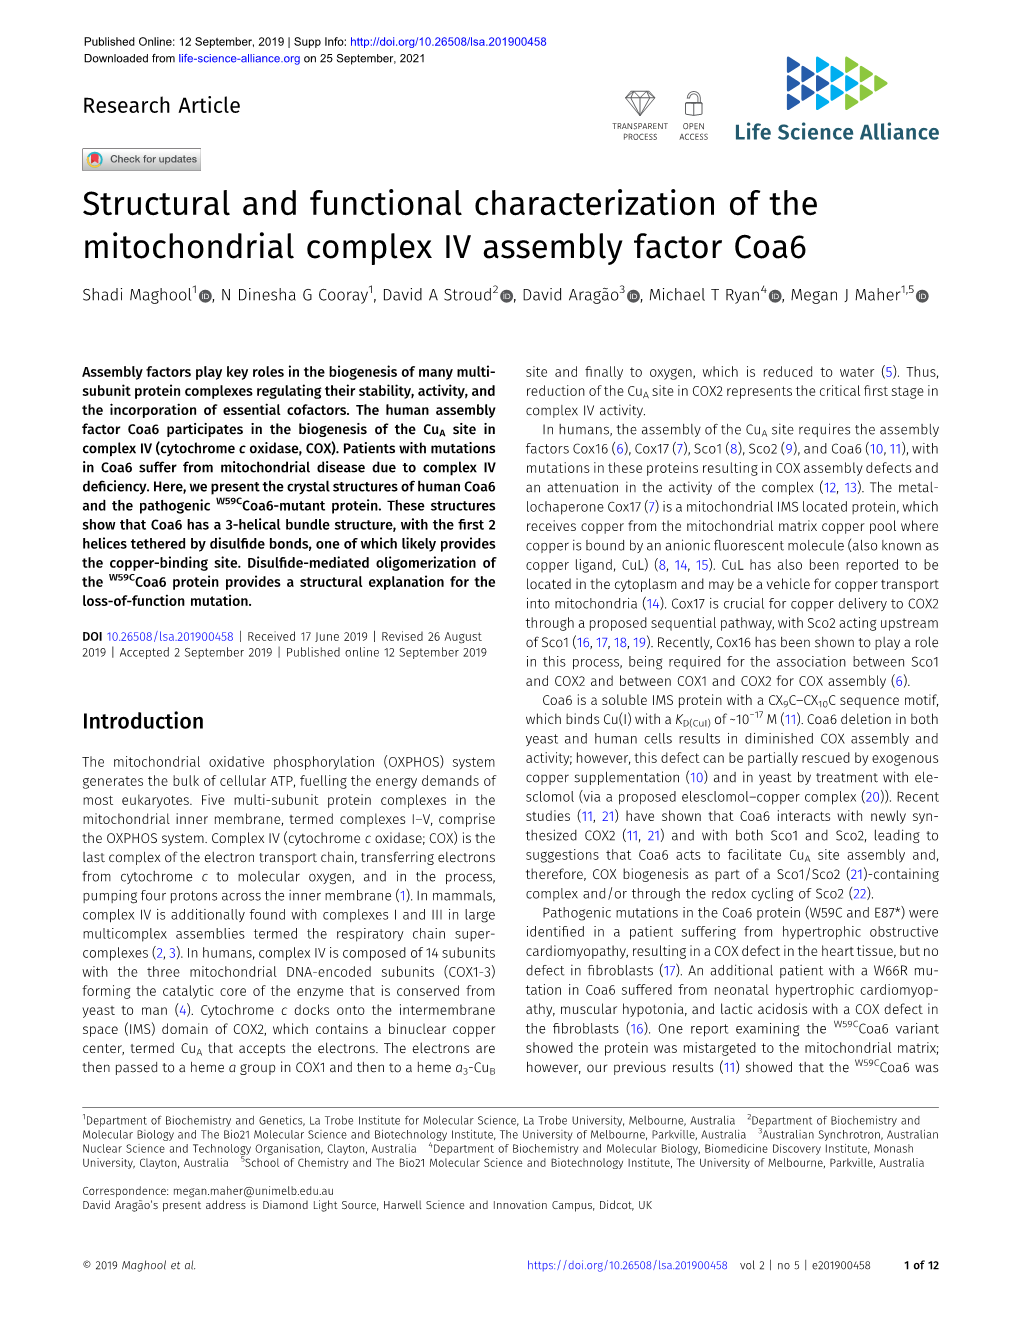 Structural and Functional Characterization of the Mitochondrial Complex IV Assembly Factor Coa6